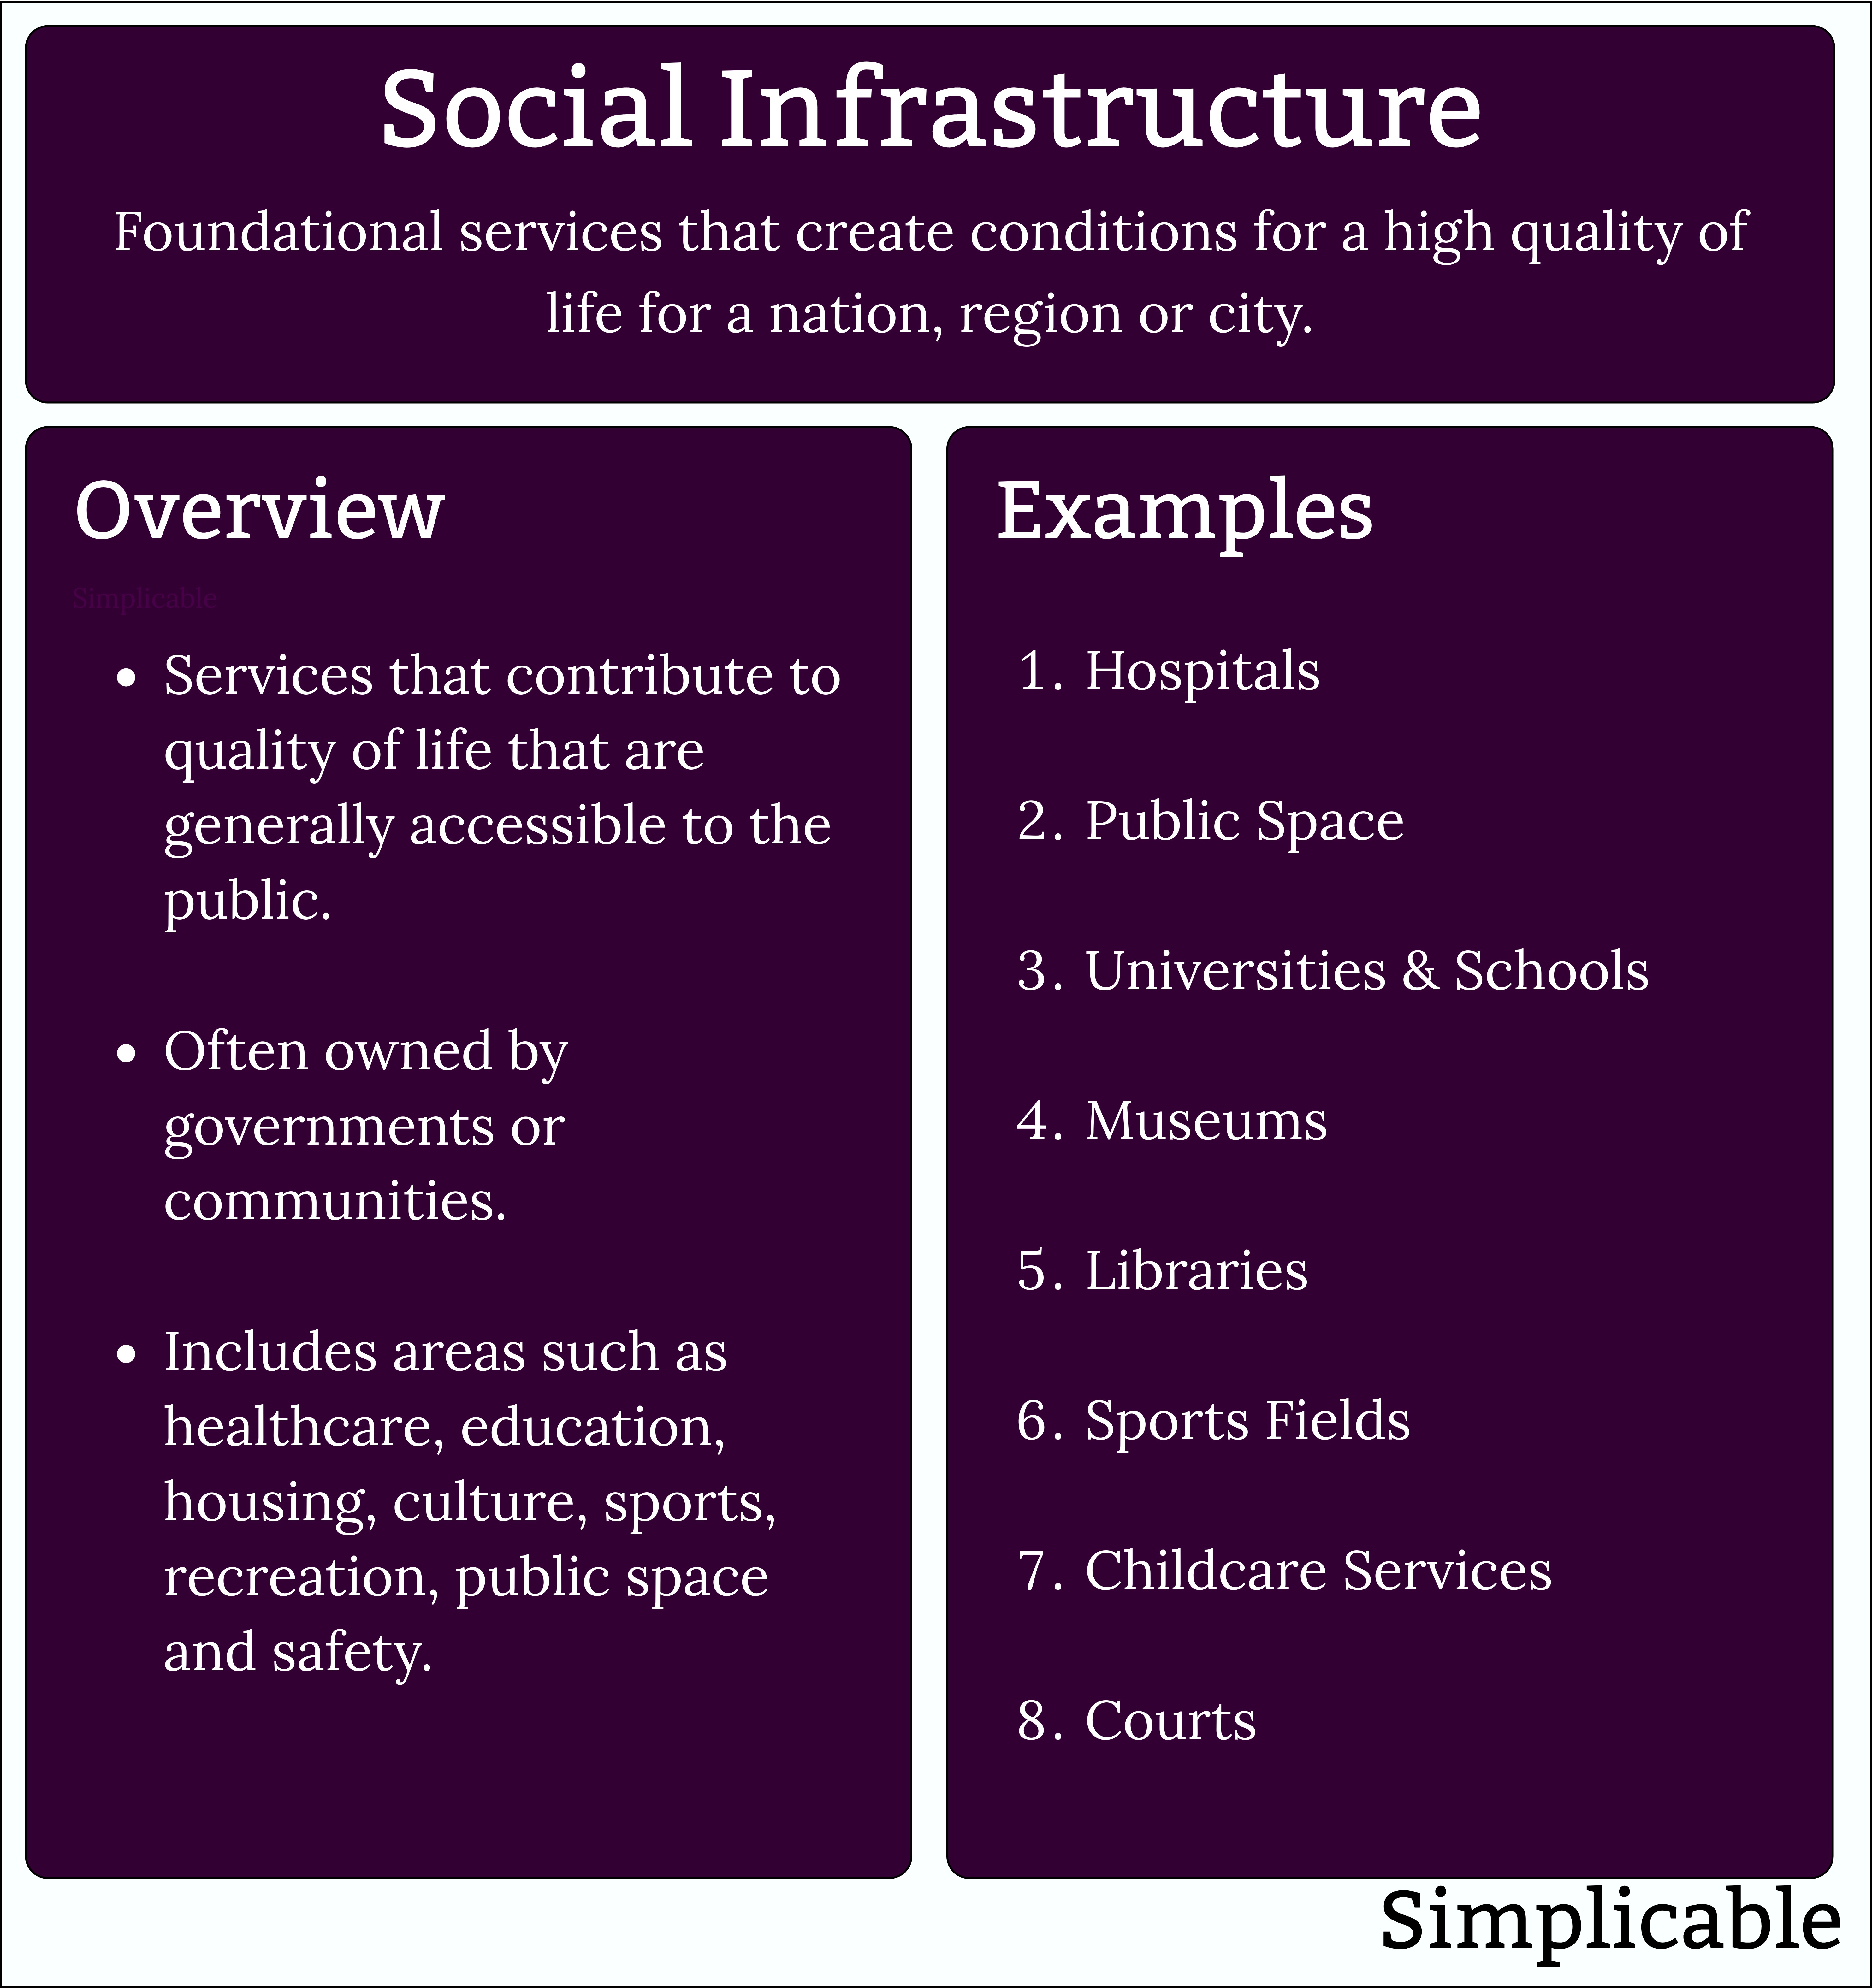 social infrastructure overview and examples